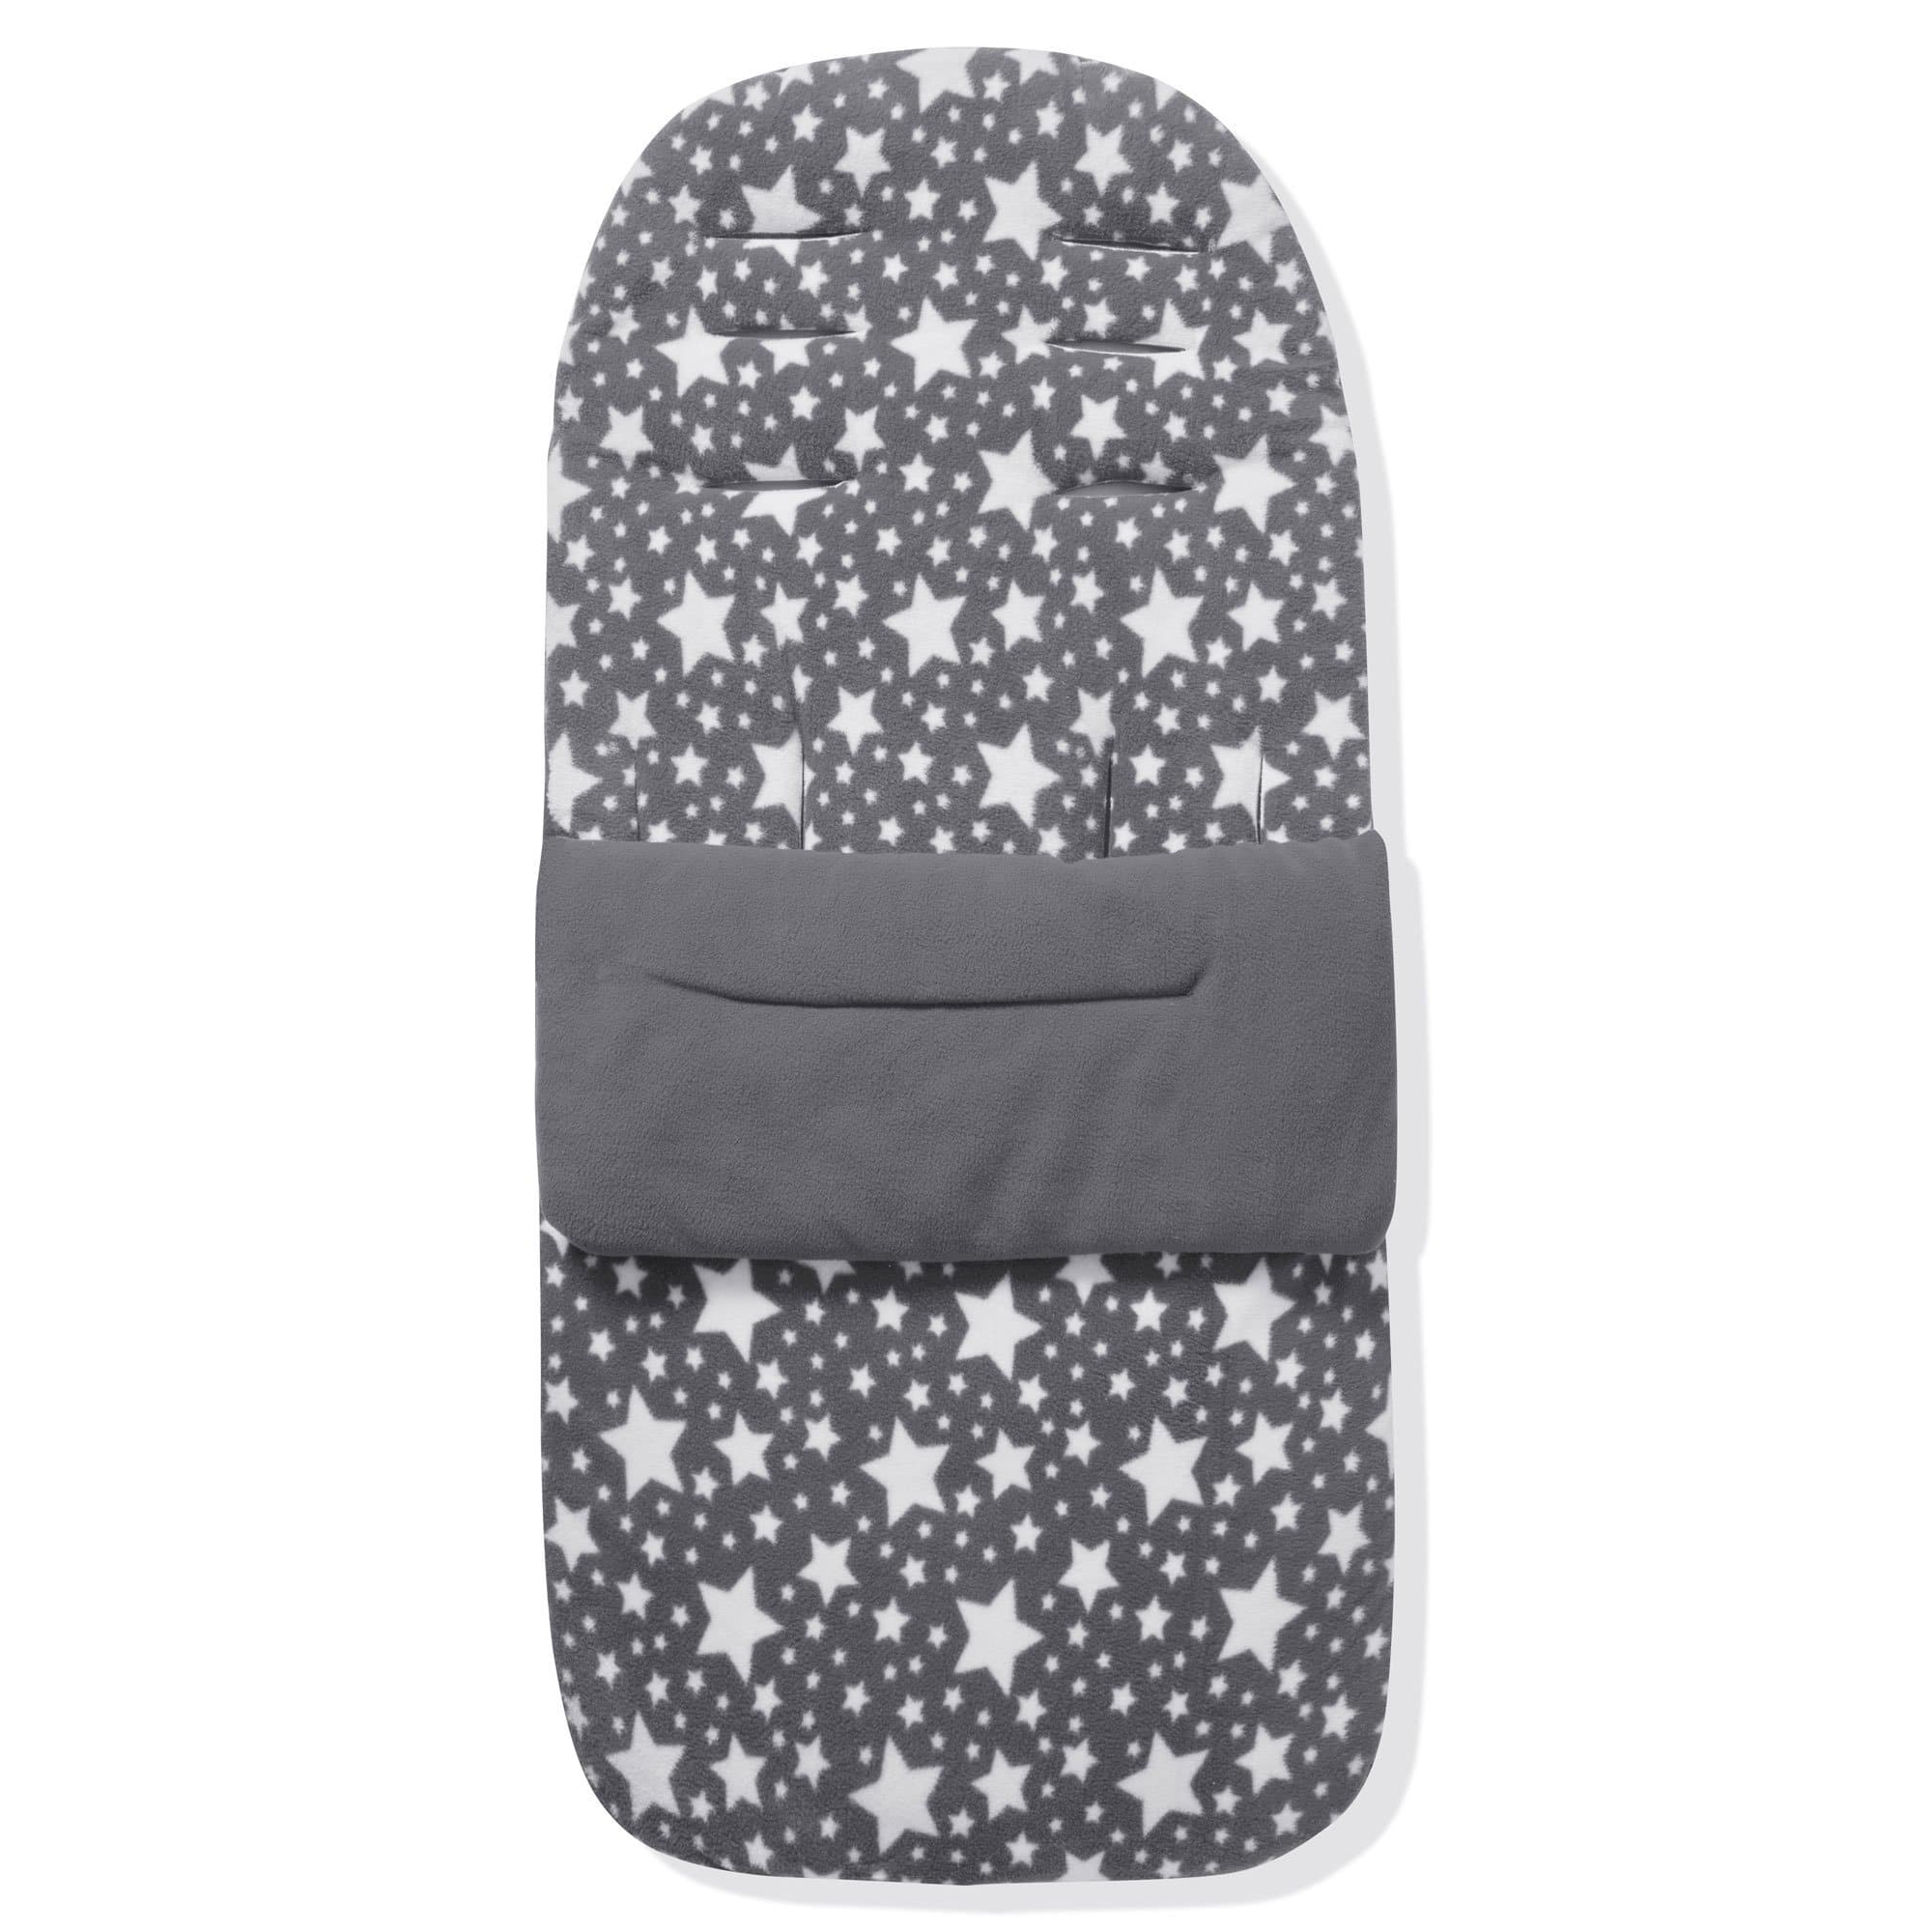 Fleece Footmuff / Cosy Toes Compatible with Mutsy - Grey Star / Fits All Models | For Your Little One